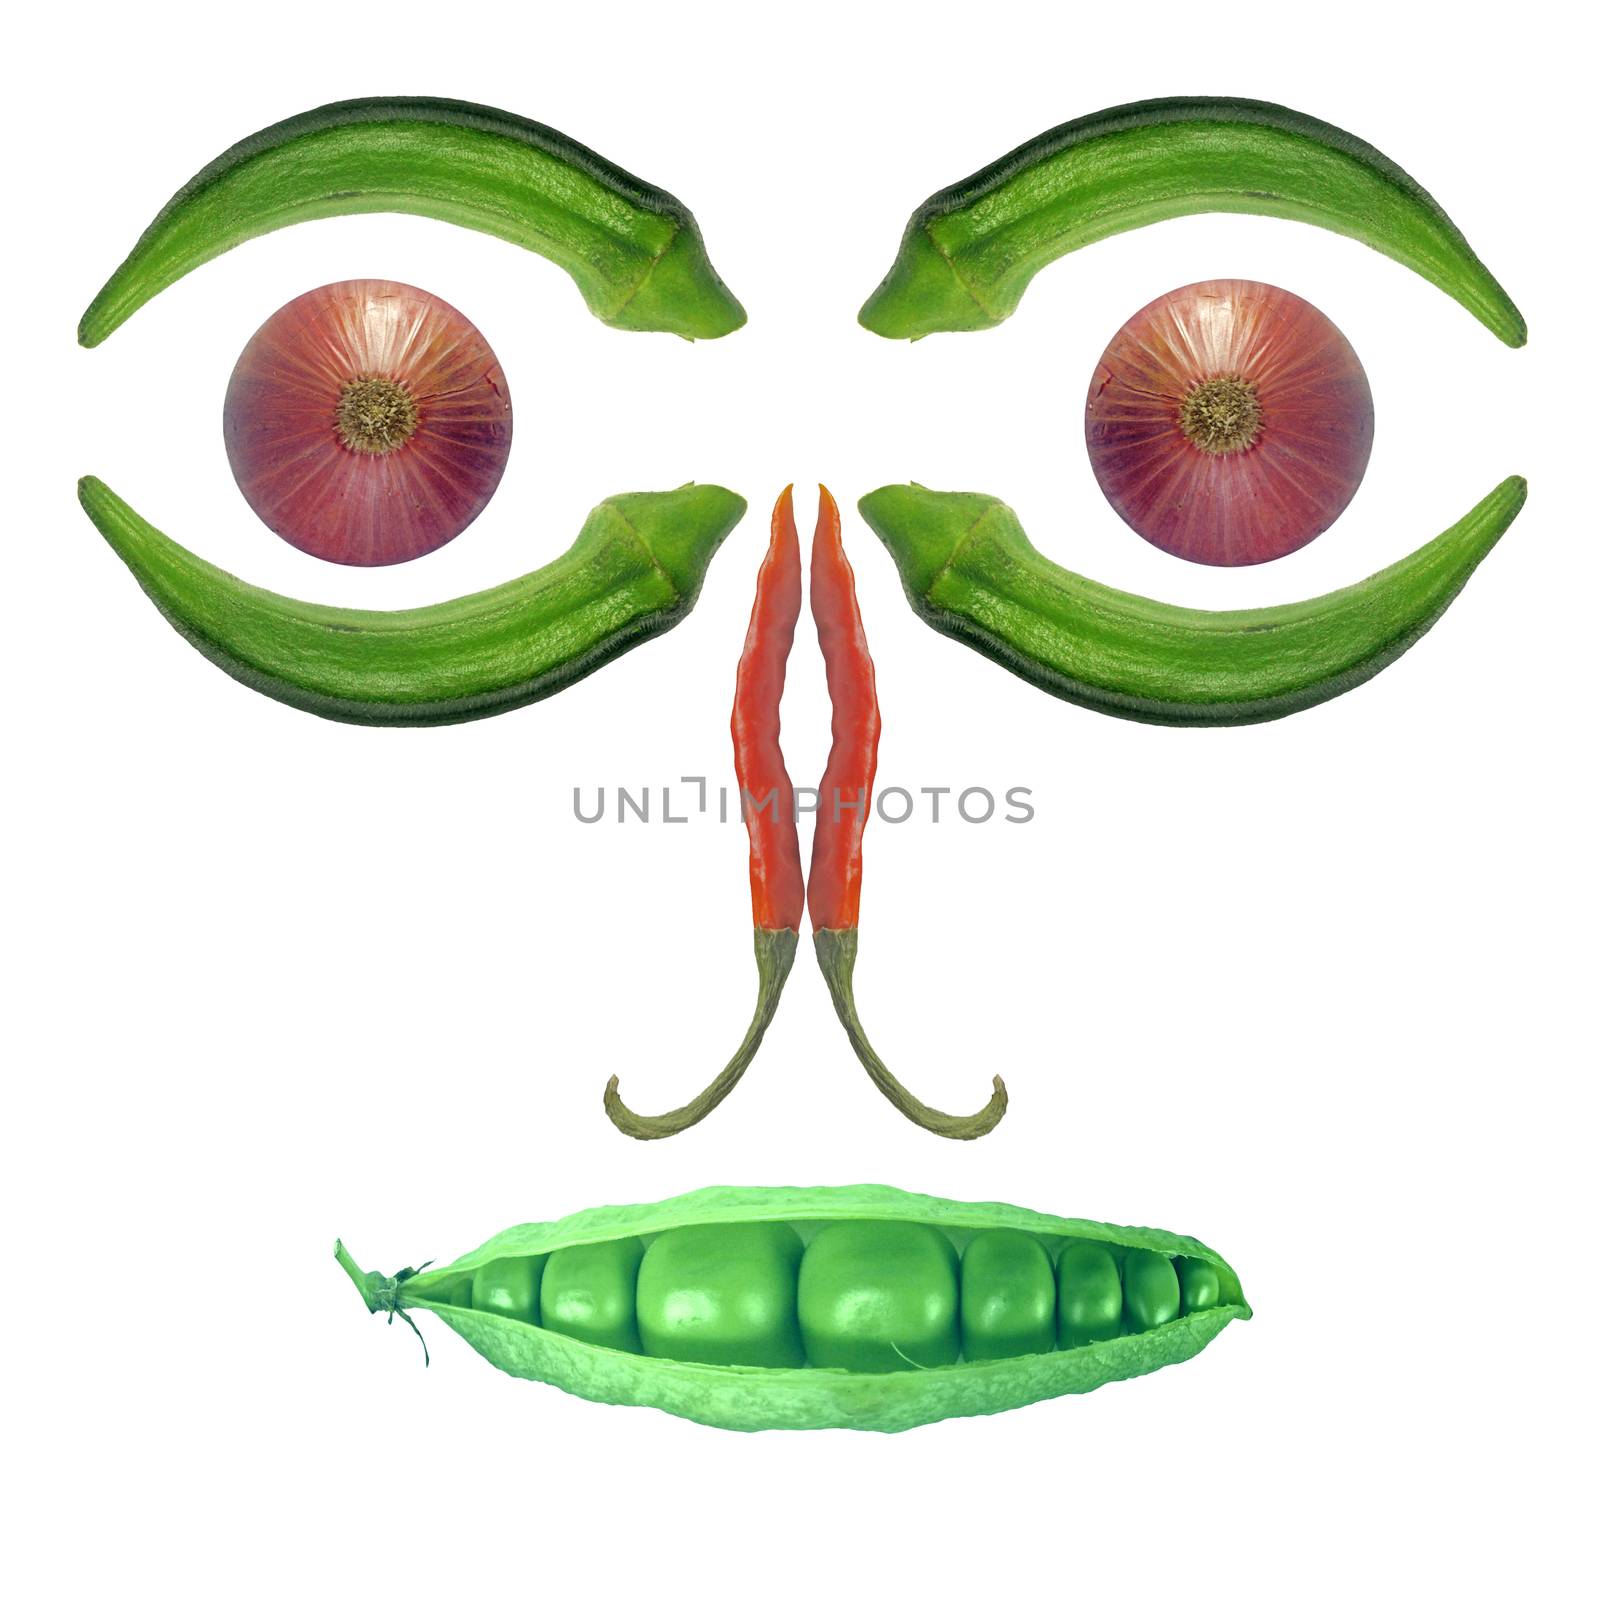 Face created with different vegetables